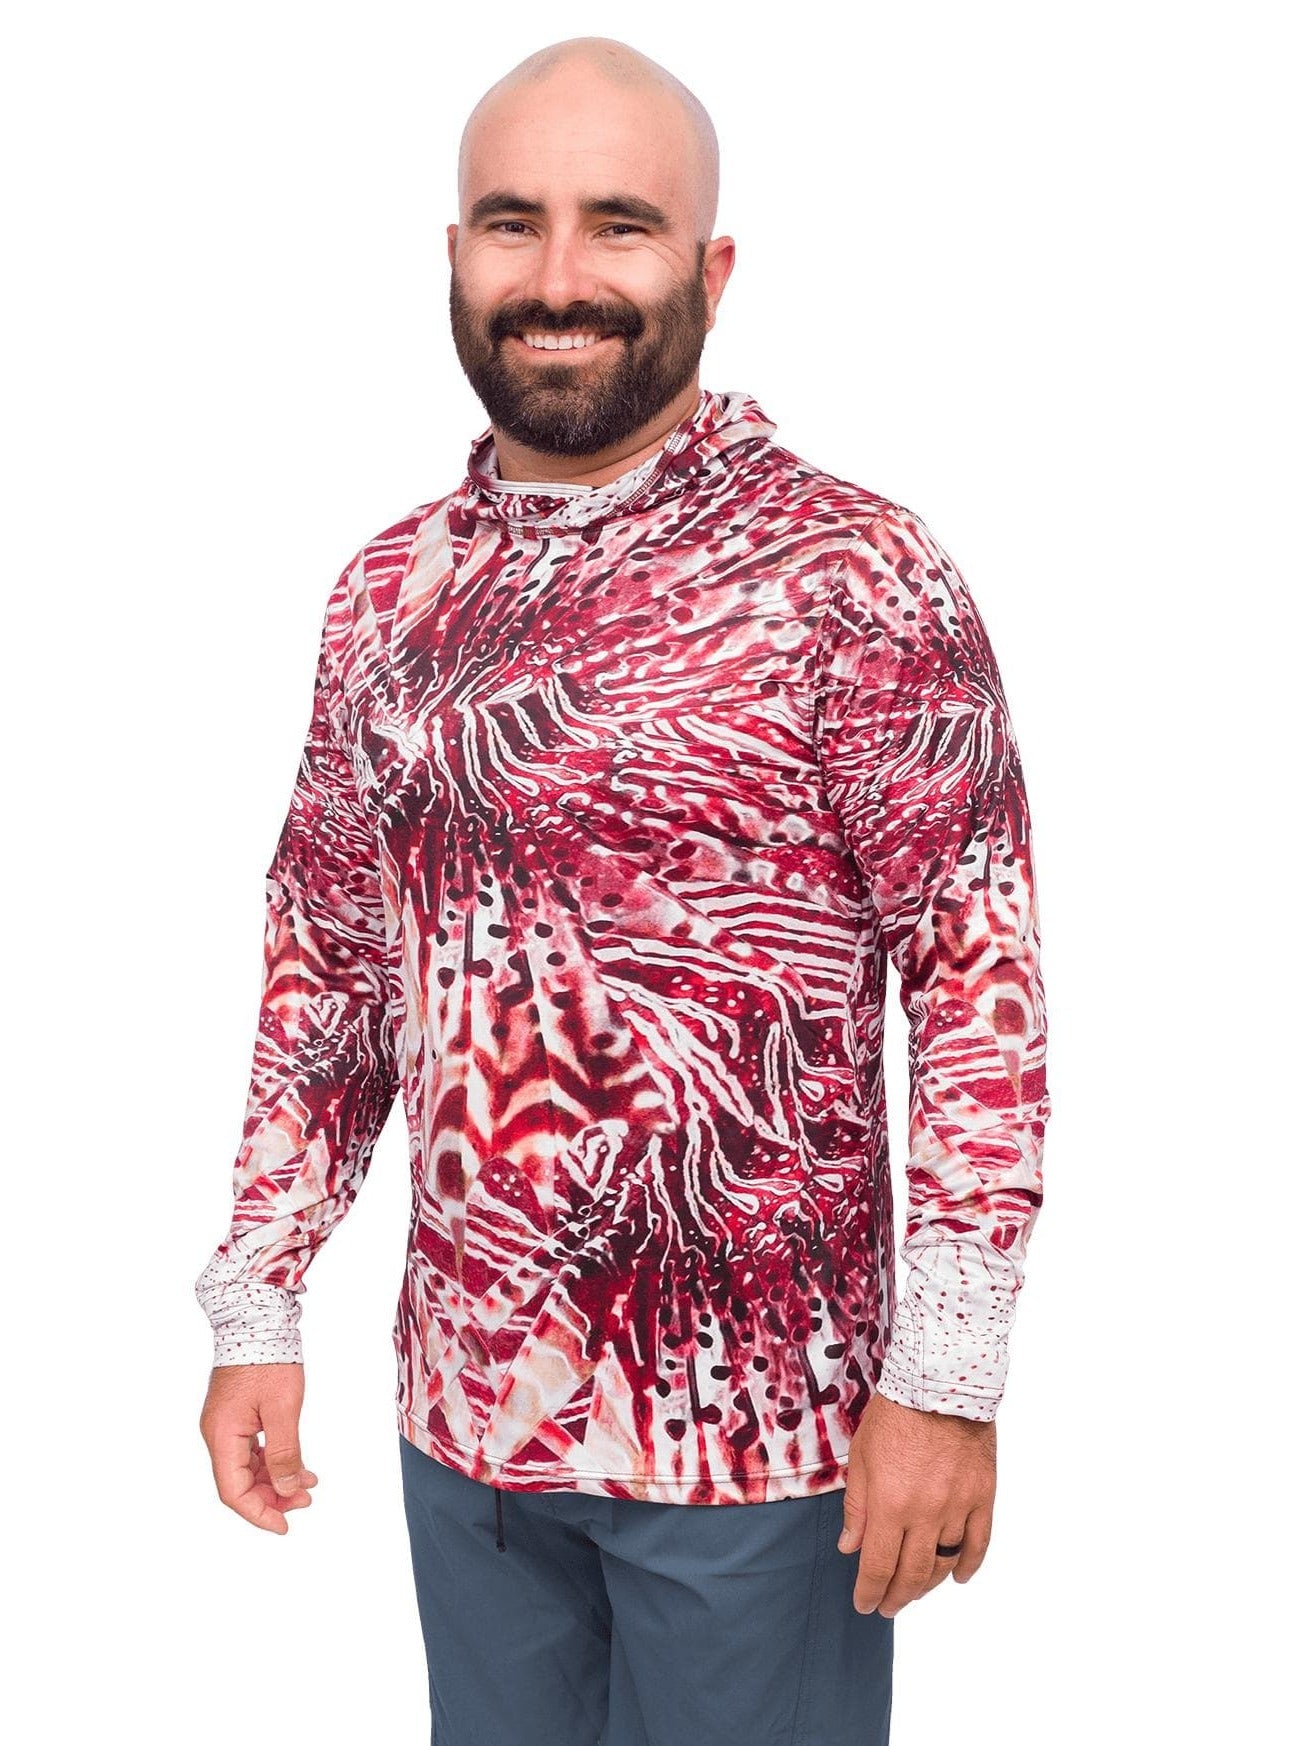 Lionfish Printed Sun Shirt | Swim | Dive Skin | Surf | UPF 50+ | male [S] | Recycled Polyester/Spandex